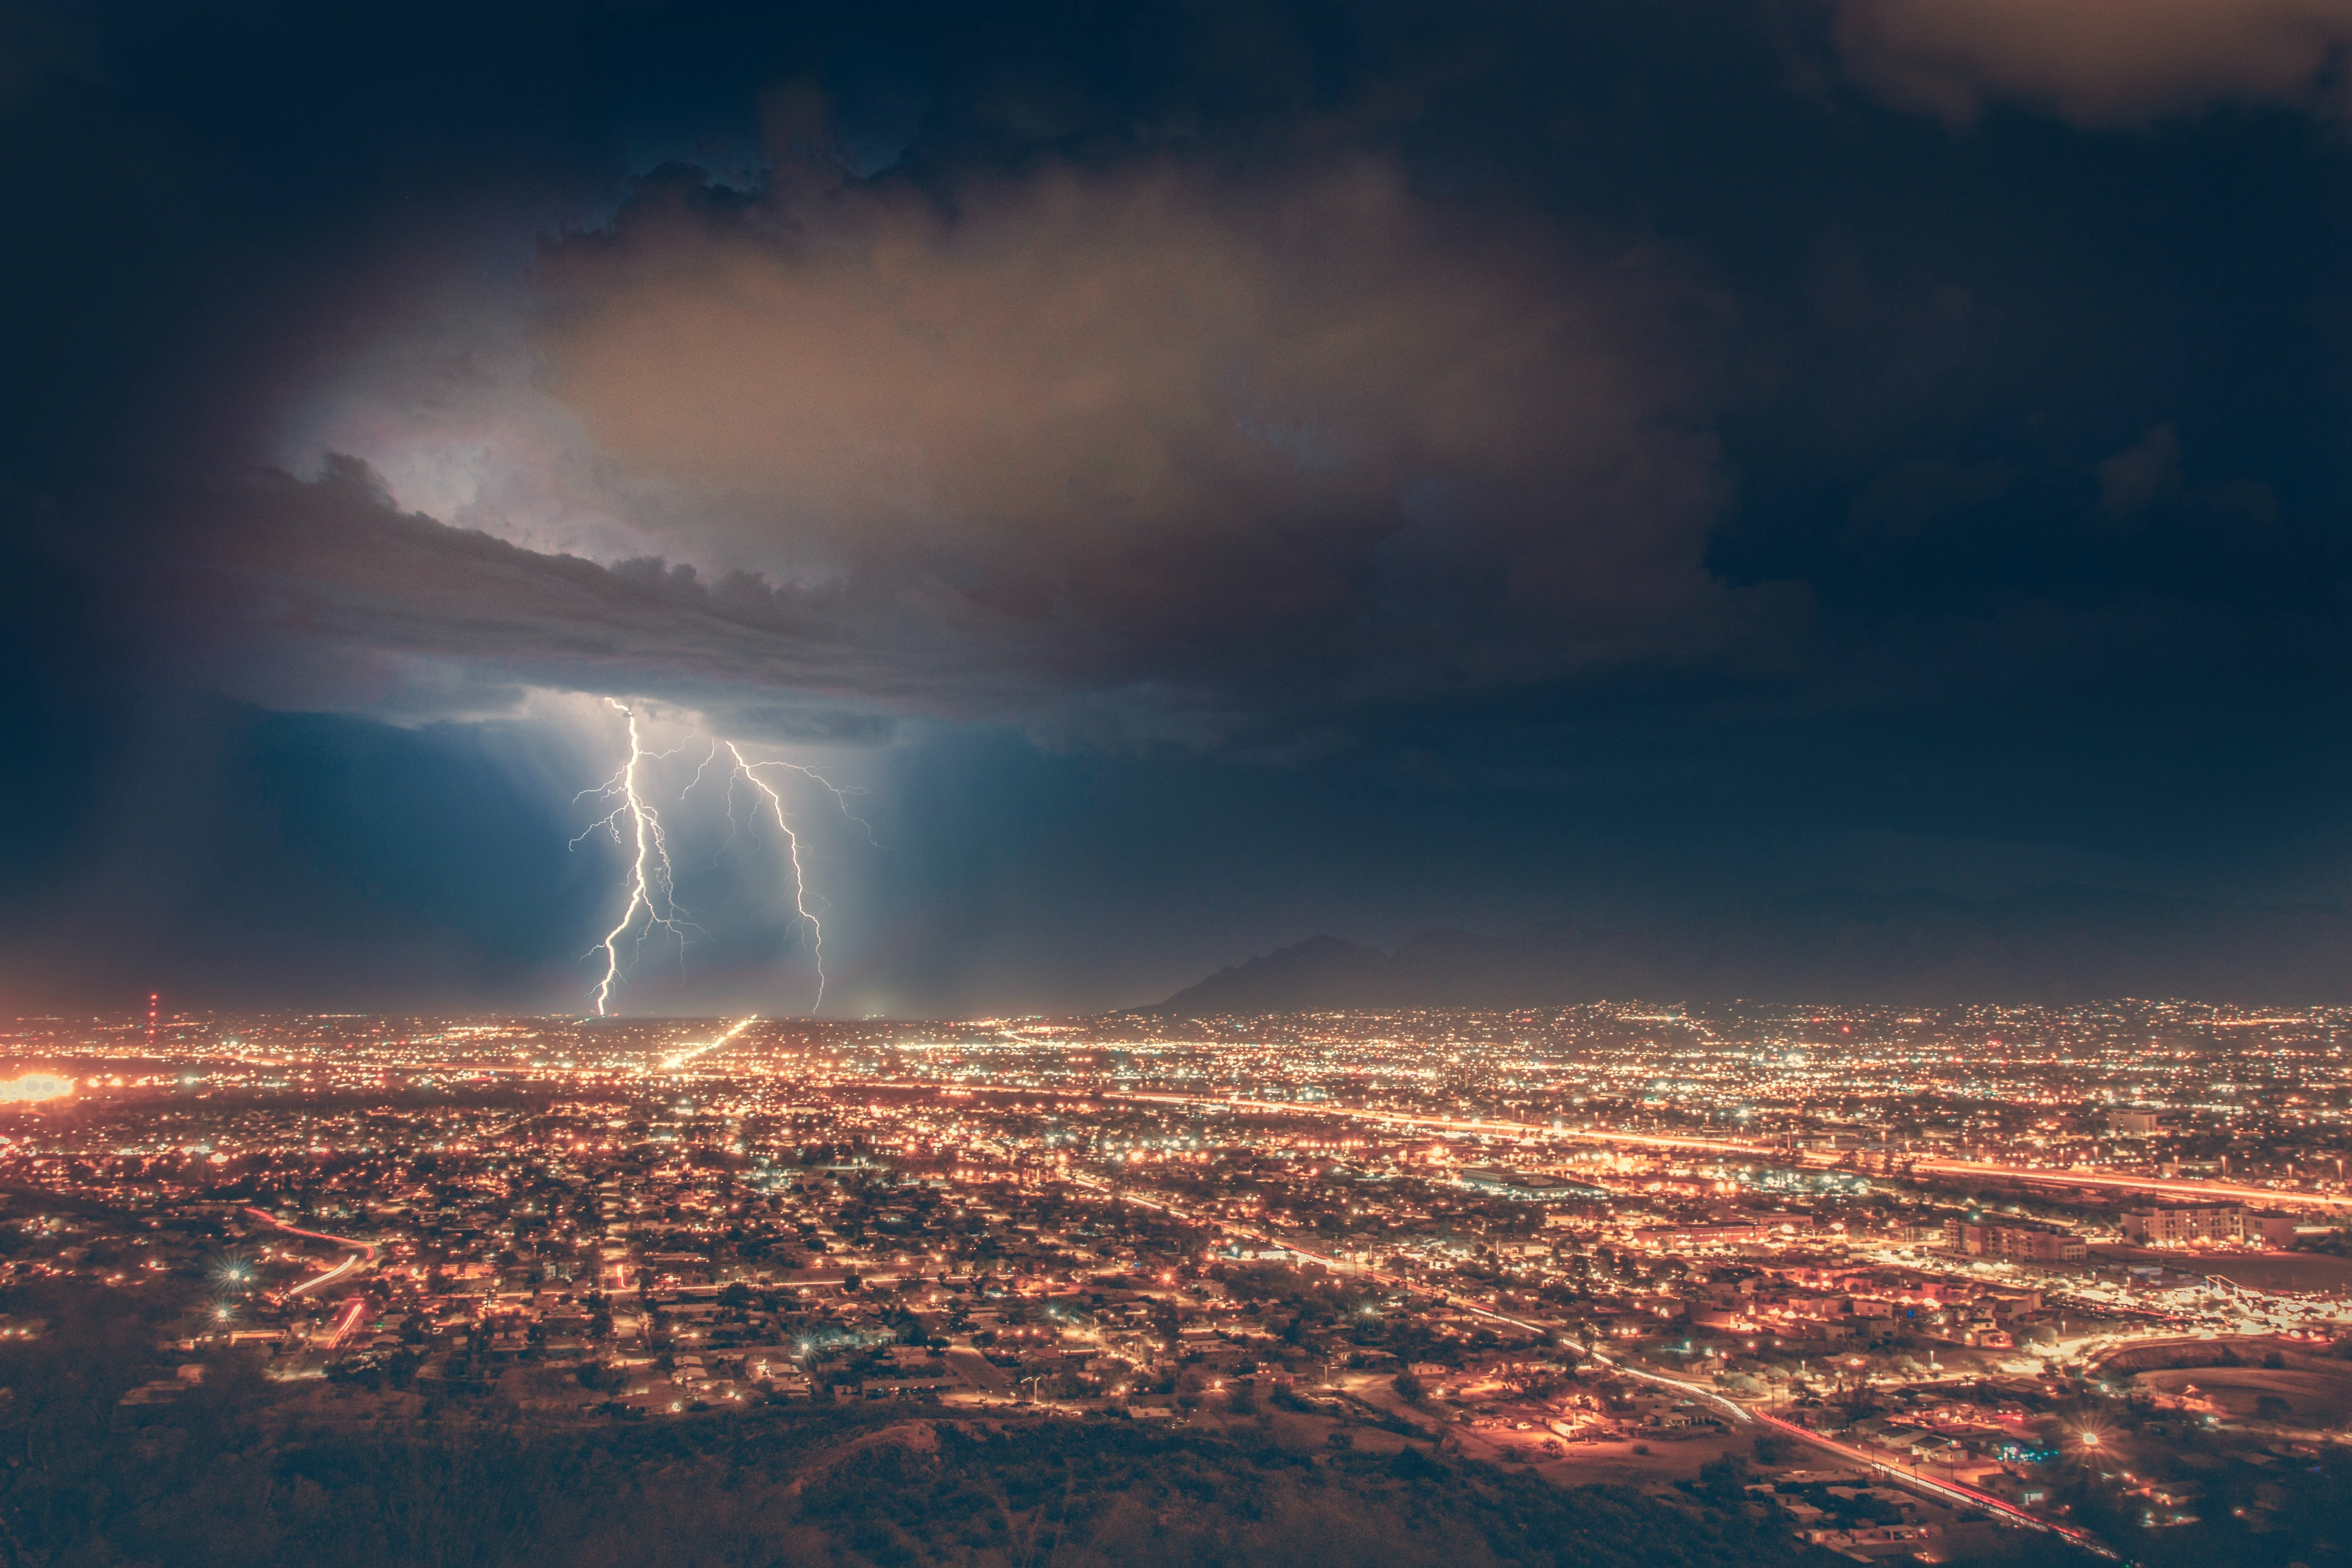 Two large lightning bolts crackle over a city.